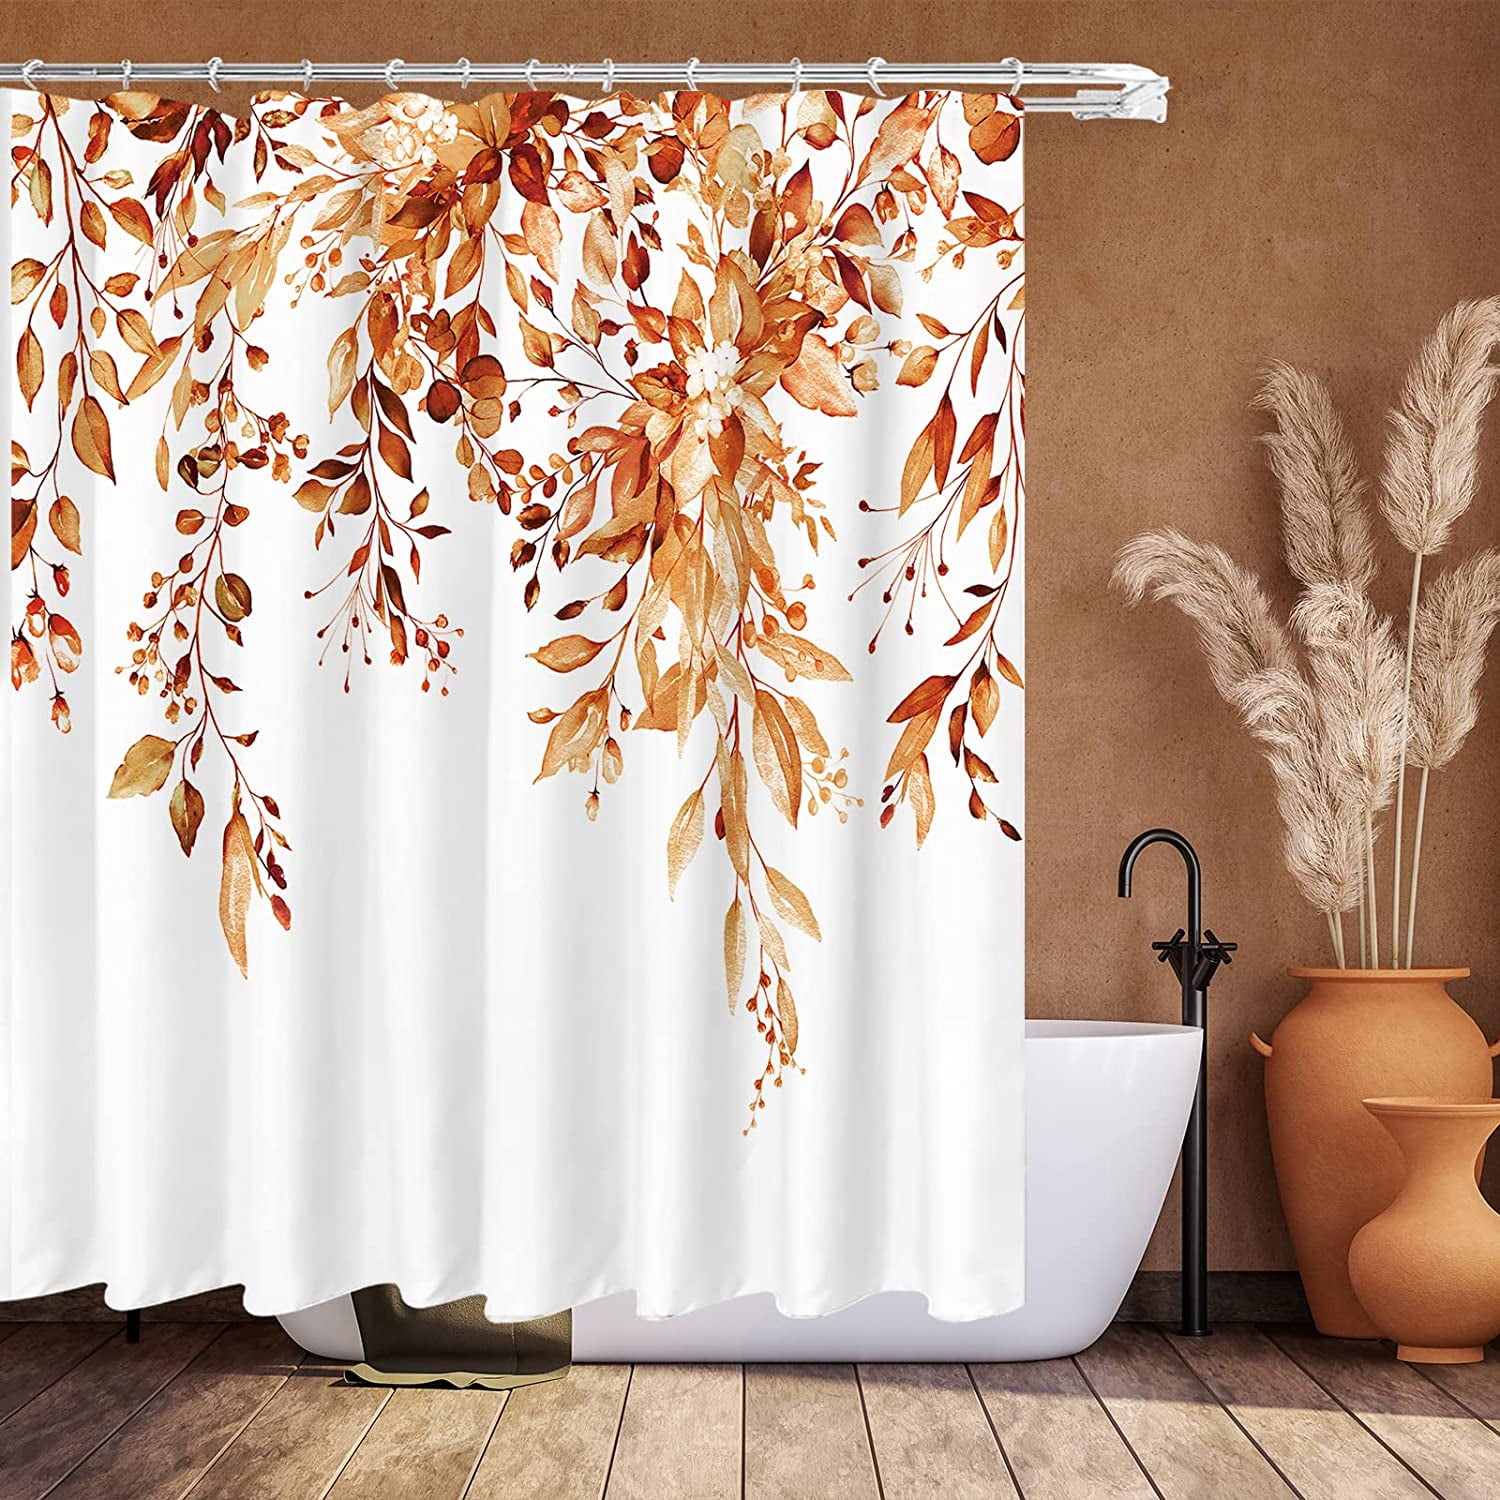 1PC COUNTRY FLORAL LEAFS CIRCLES PRINTED BATHROOM SHOWER CURTAIN W/HOOKS NEW 